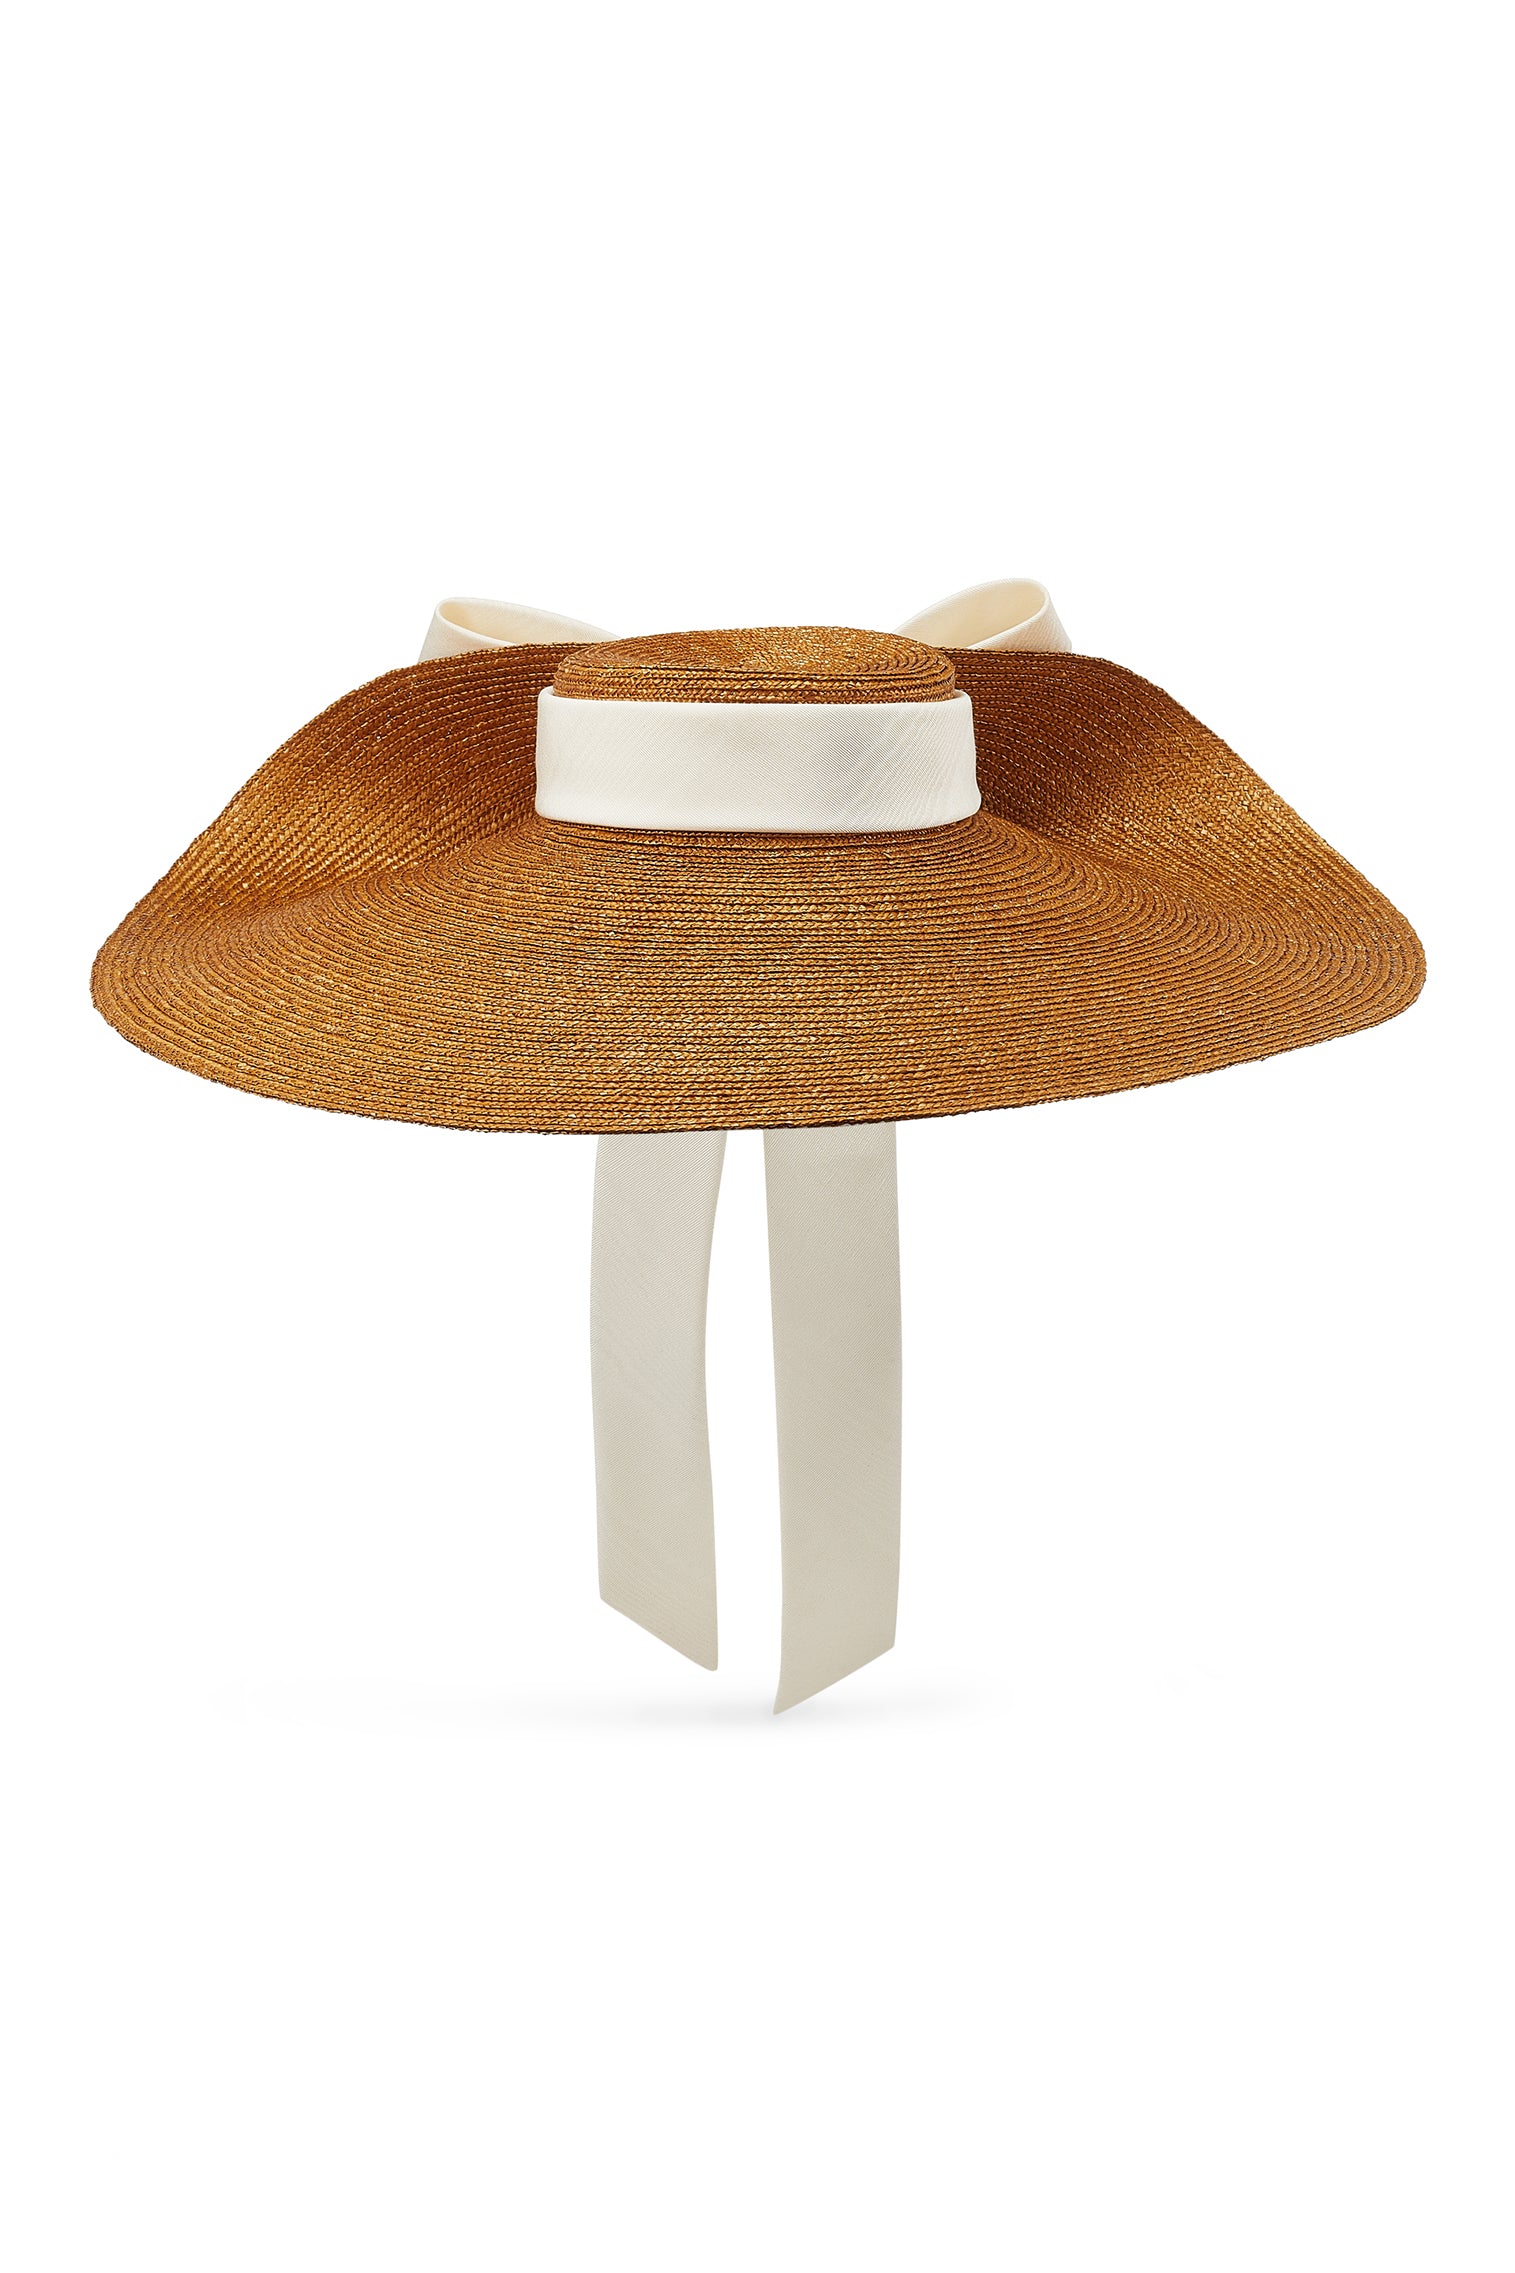 Lady Grey Natural Wide Brim Hat - Lock Couture by Awon Golding - Lock & Co. Hatters London UK